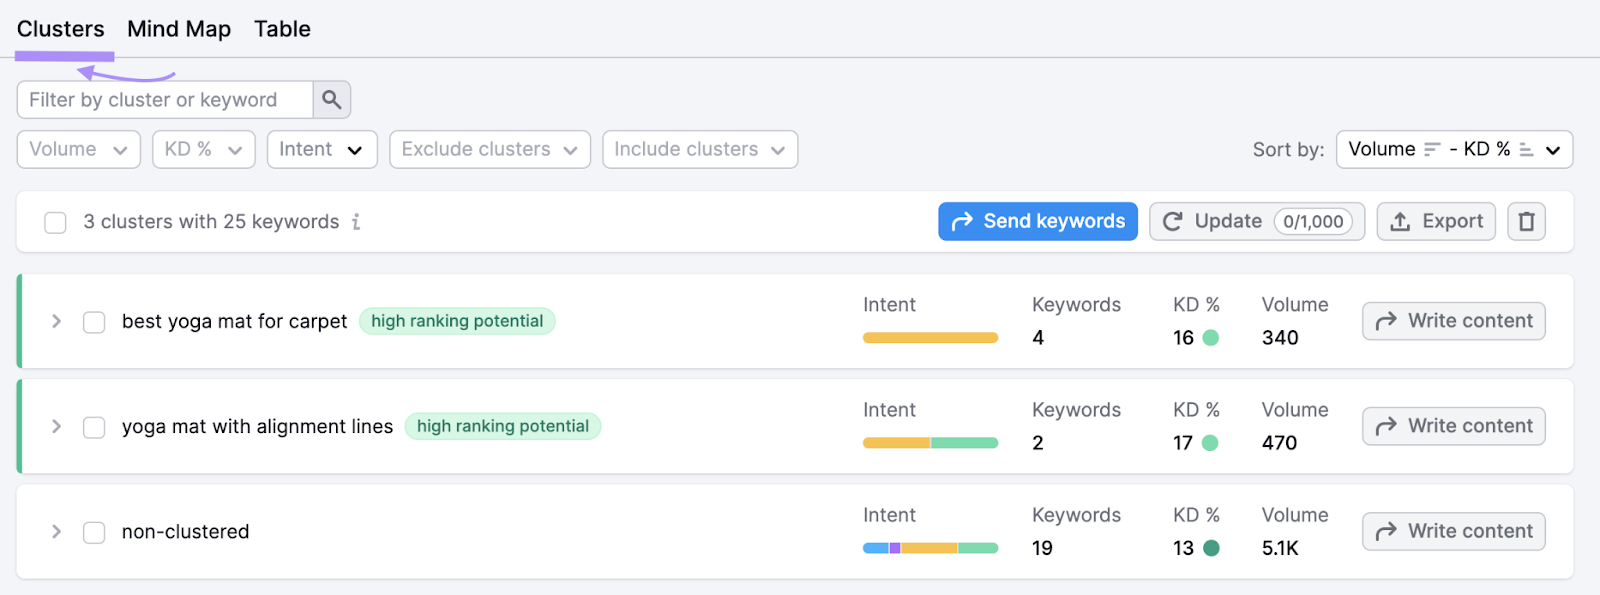 “Clusters” tab in Keyword Manager